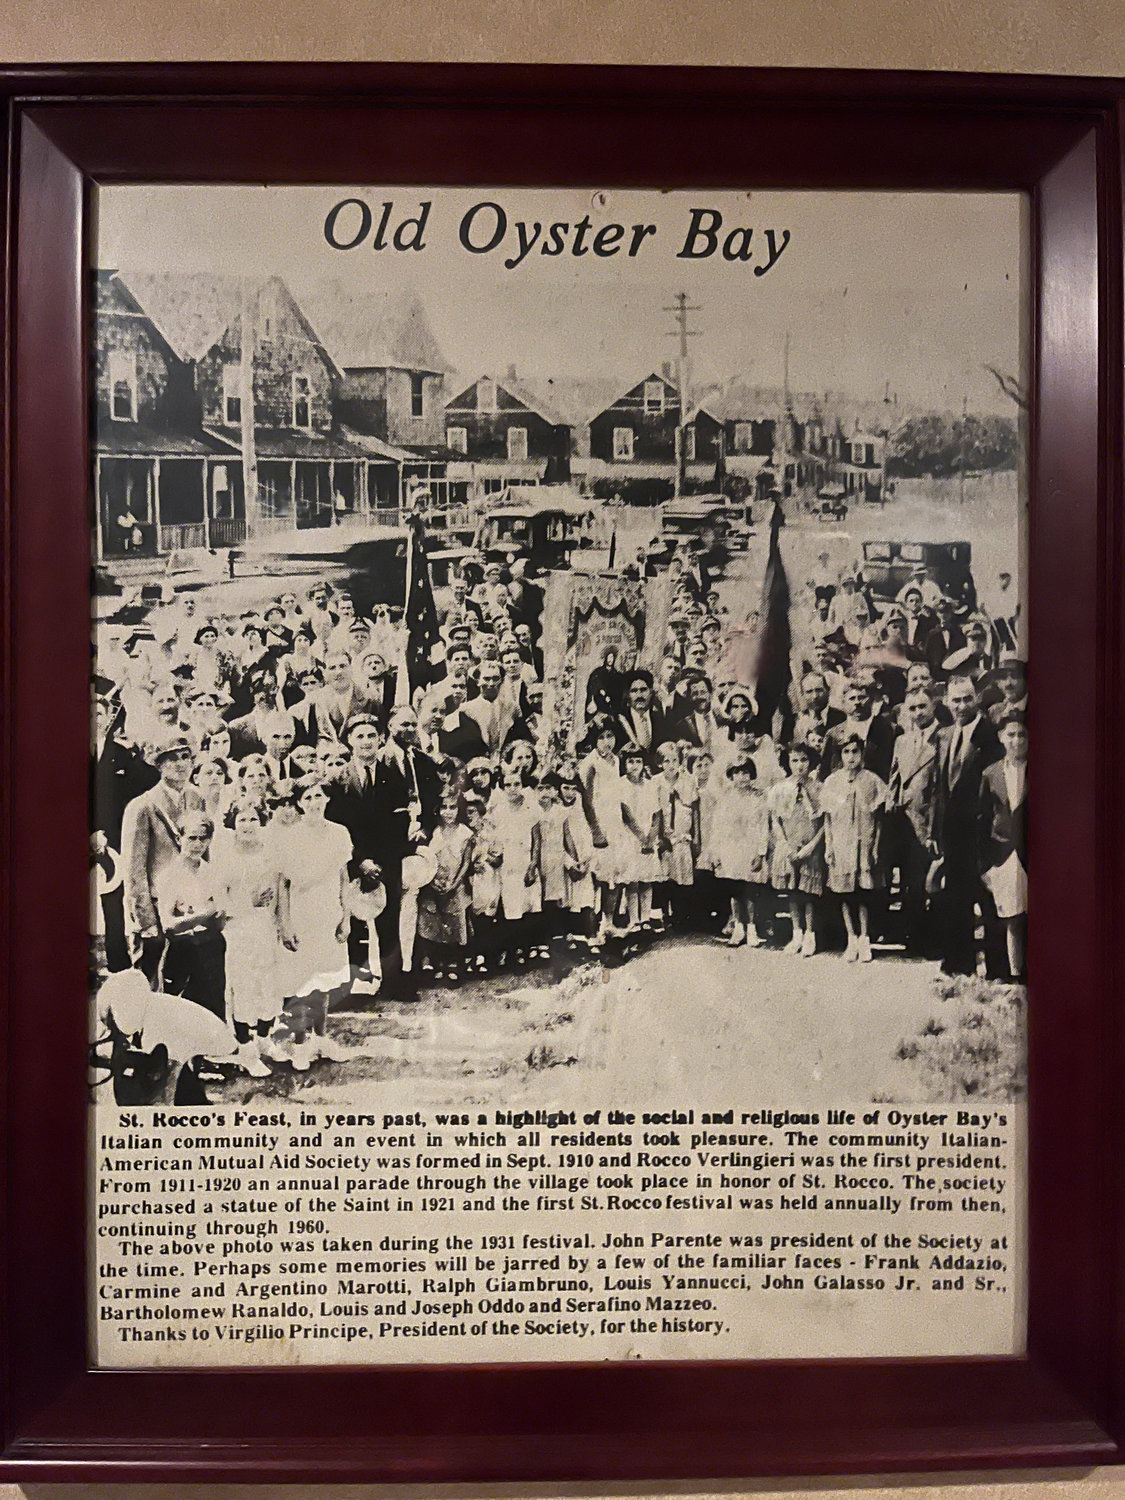 The St. Rocco’s Festival has been held in Oyster Bay for over 100 years. Attendees and organizers gathered in 1931 to mark the event.